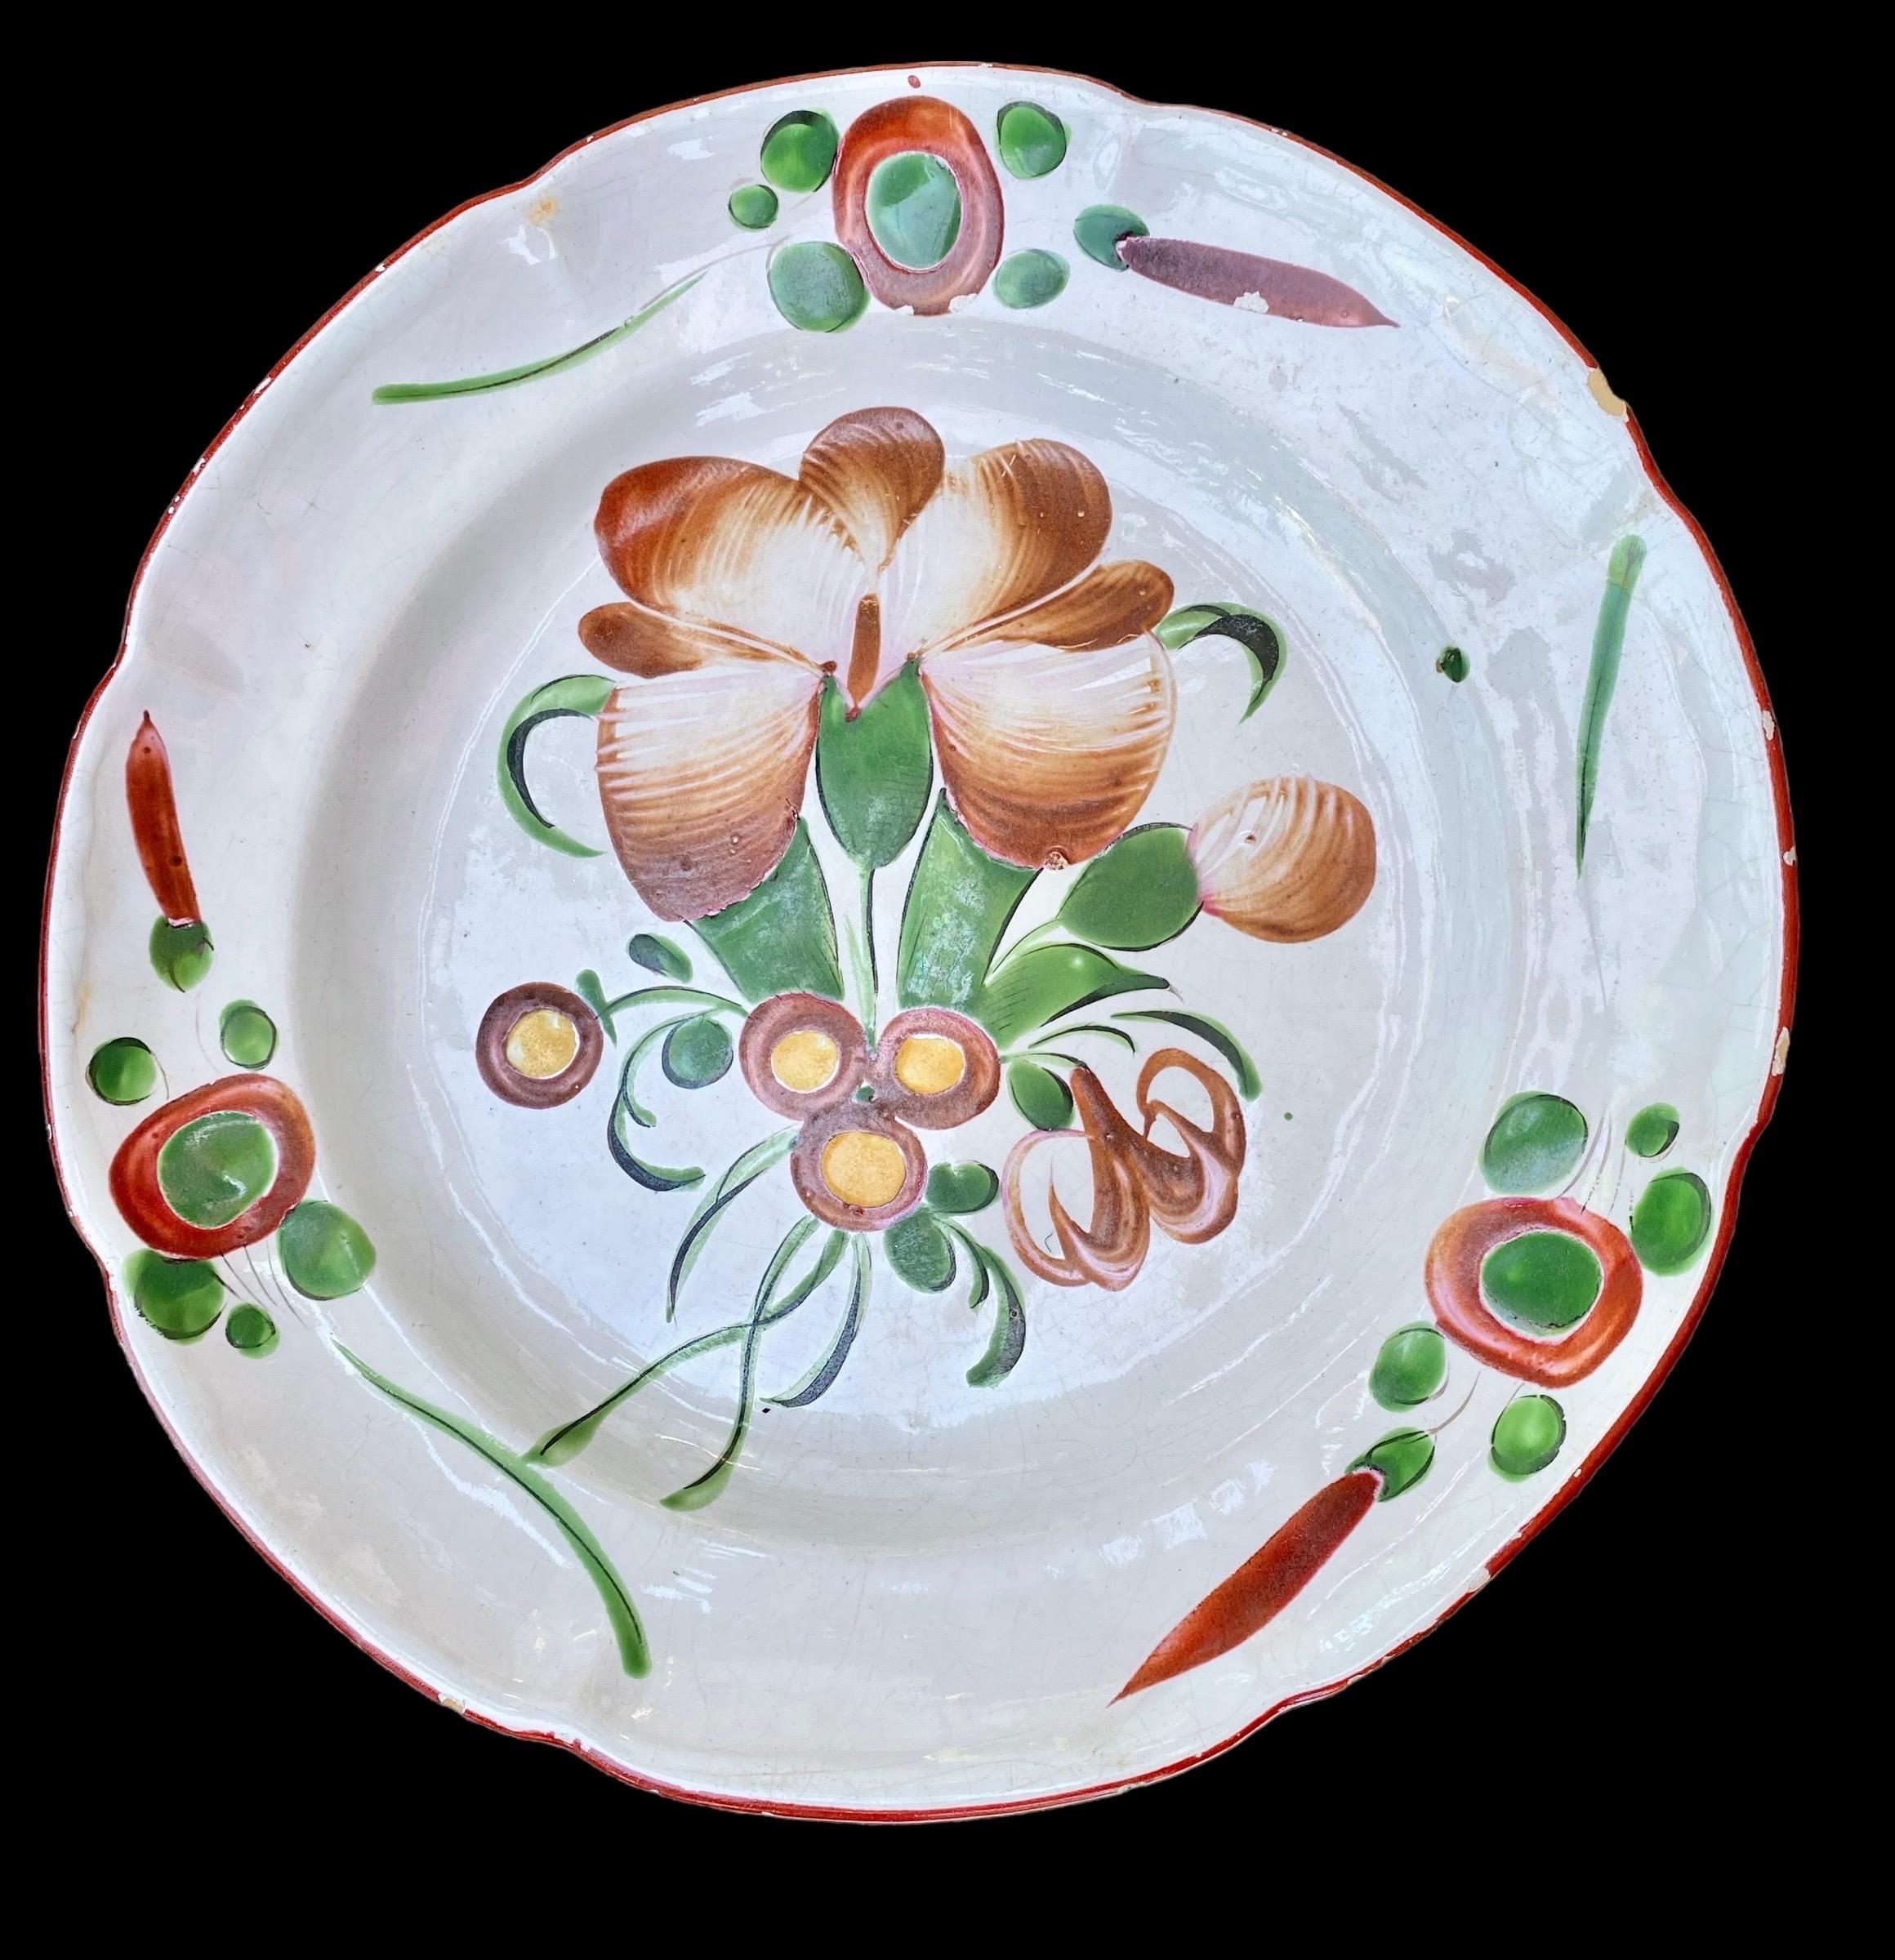 A 19th century French faience charger or platter with typical hand painted burgundy floral decoration from St Clement in the East of France. Minor glaze loss. Old brass plate hanger is still attached. 